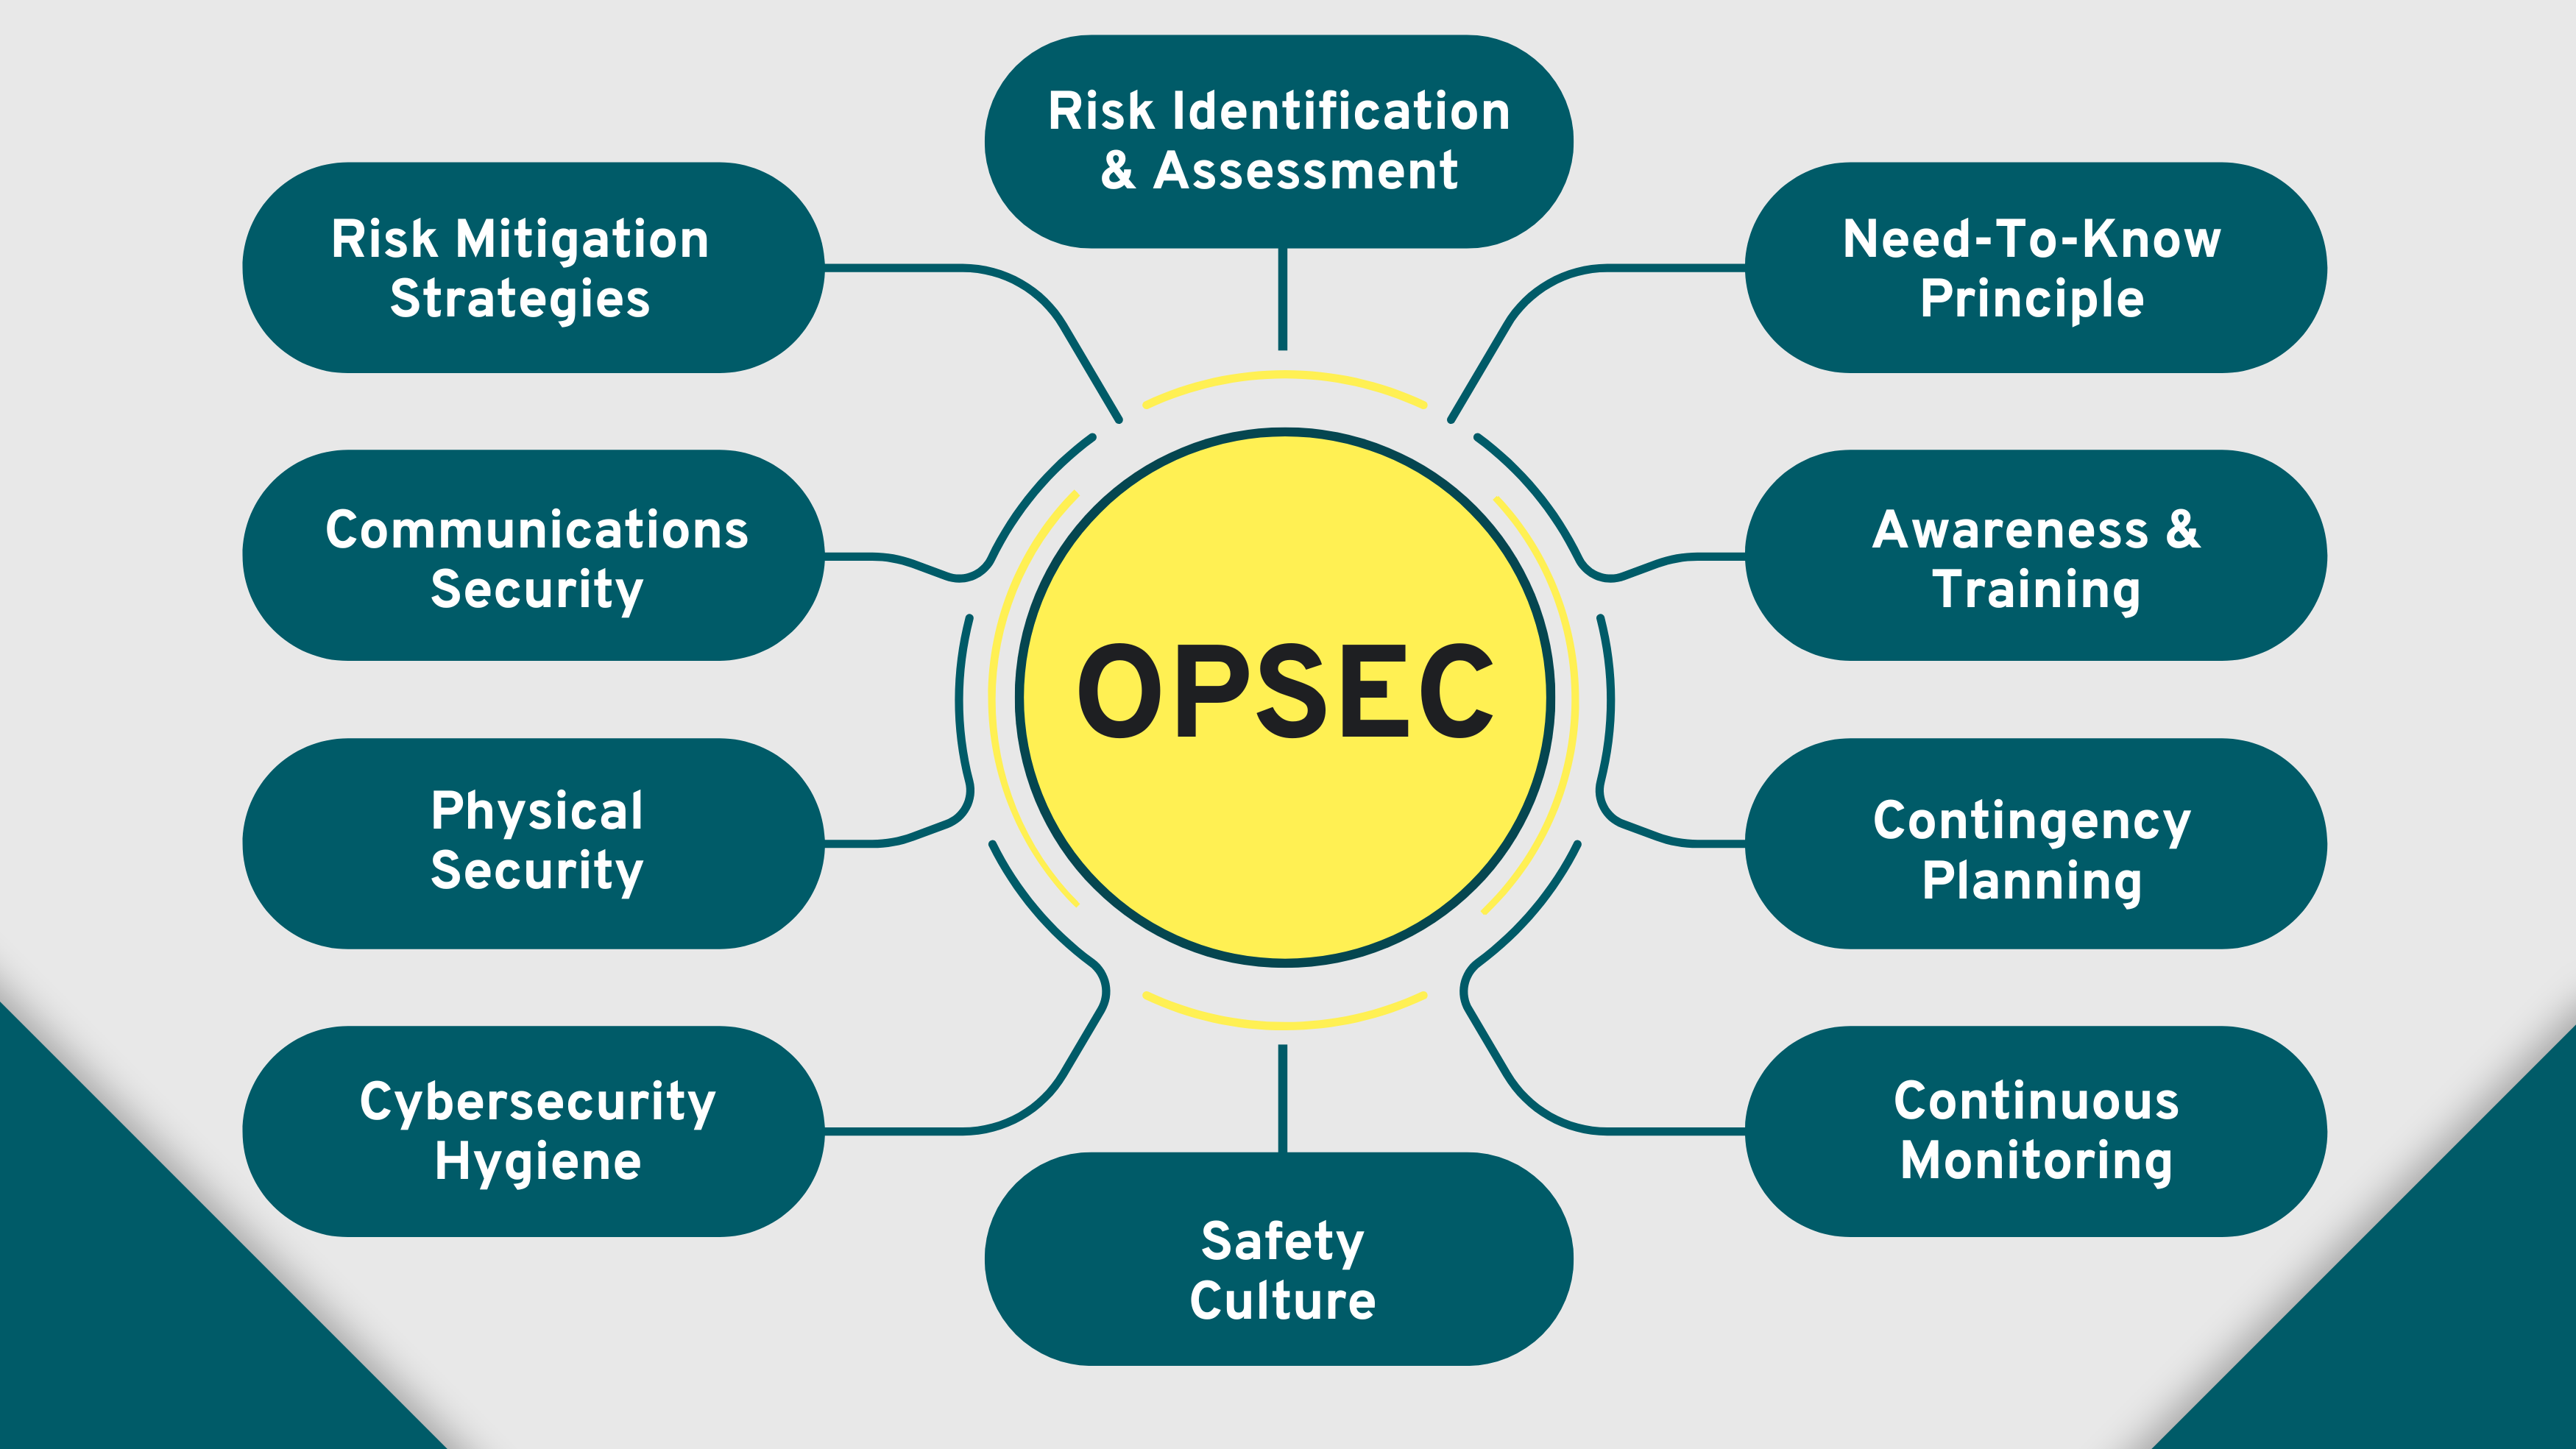 The elements of good operational security, OPSEC